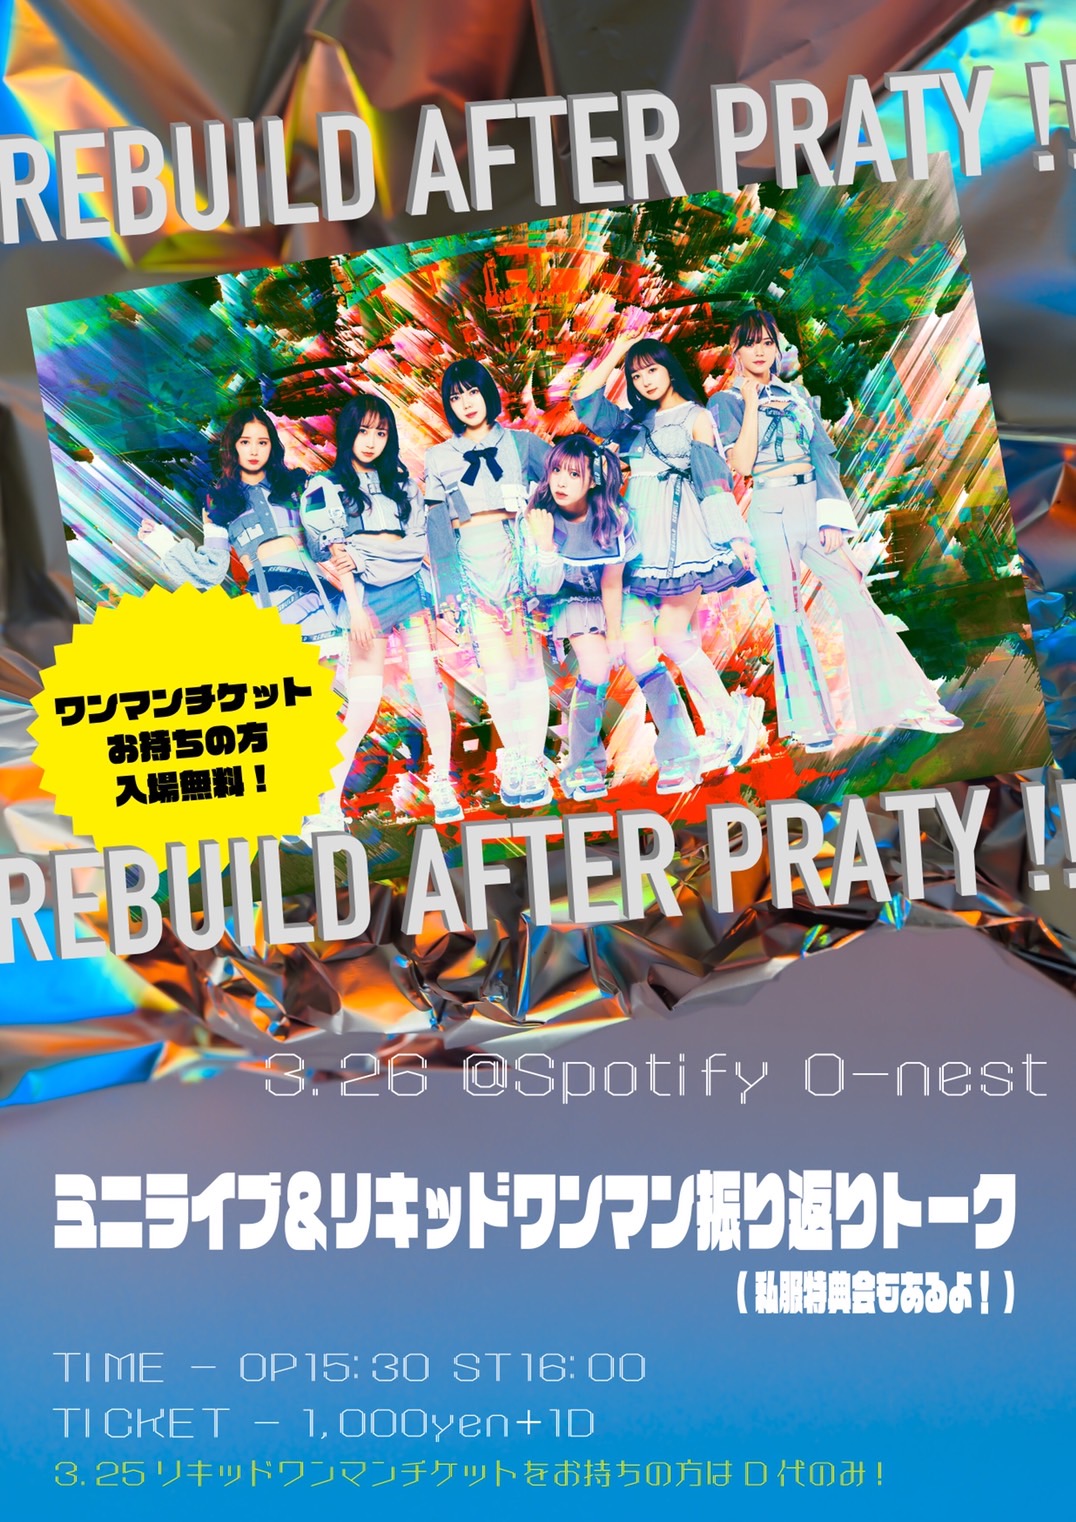 REBUILD AFTER PARTY!!